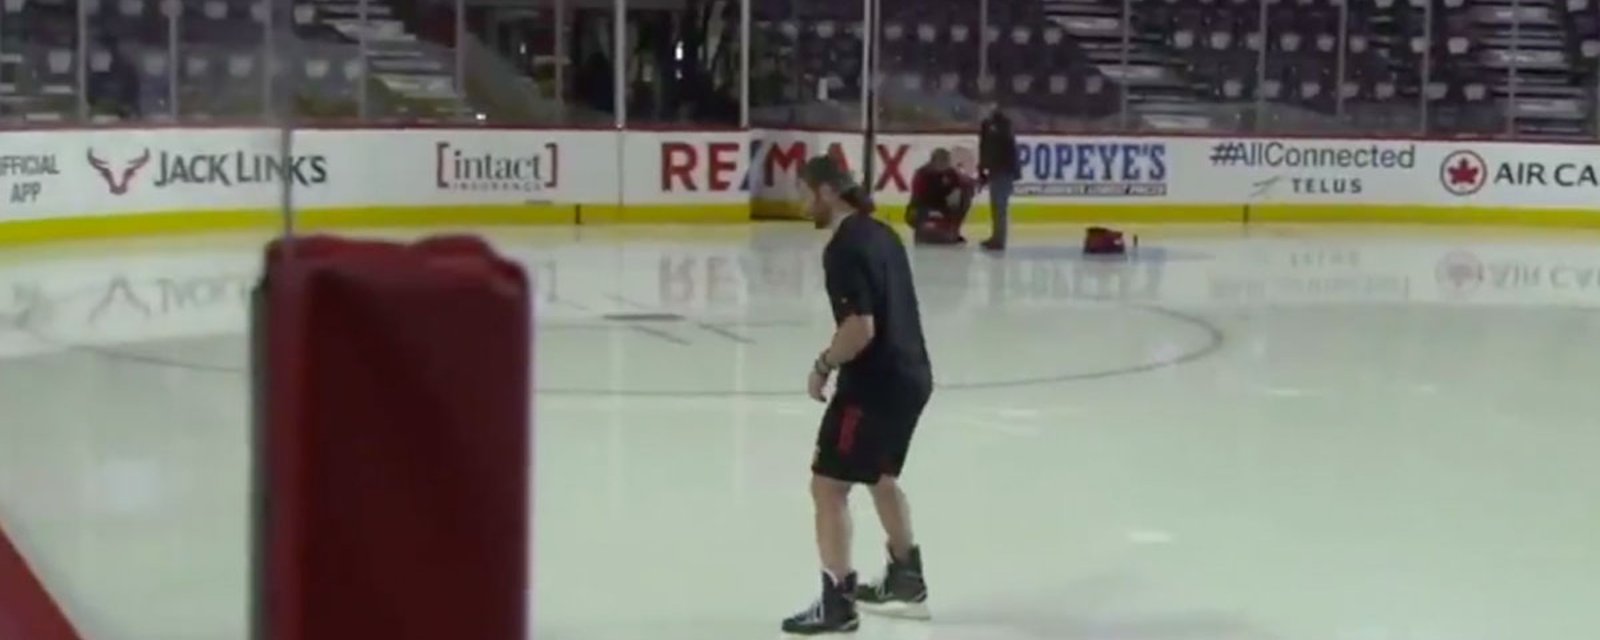 Must see: Jagr takes the ice for the first time as a Flame in Calgary! 